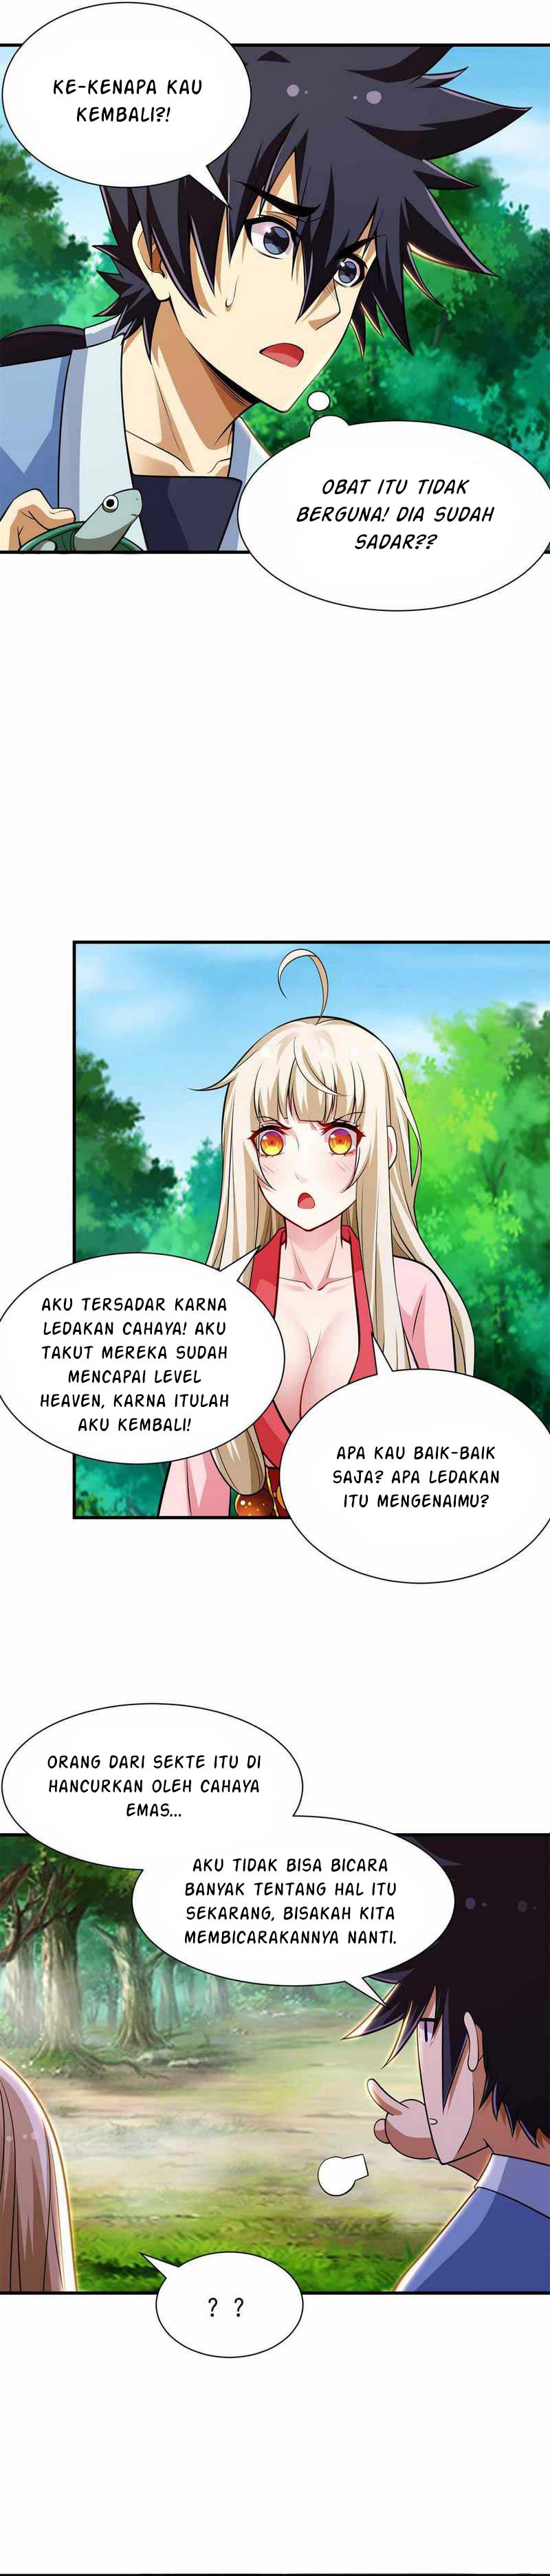 Dilarang COPAS - situs resmi www.mangacanblog.com - Komik i just want to be beaten to death by everyone 026 - chapter 26 27 Indonesia i just want to be beaten to death by everyone 026 - chapter 26 Terbaru 3|Baca Manga Komik Indonesia|Mangacan